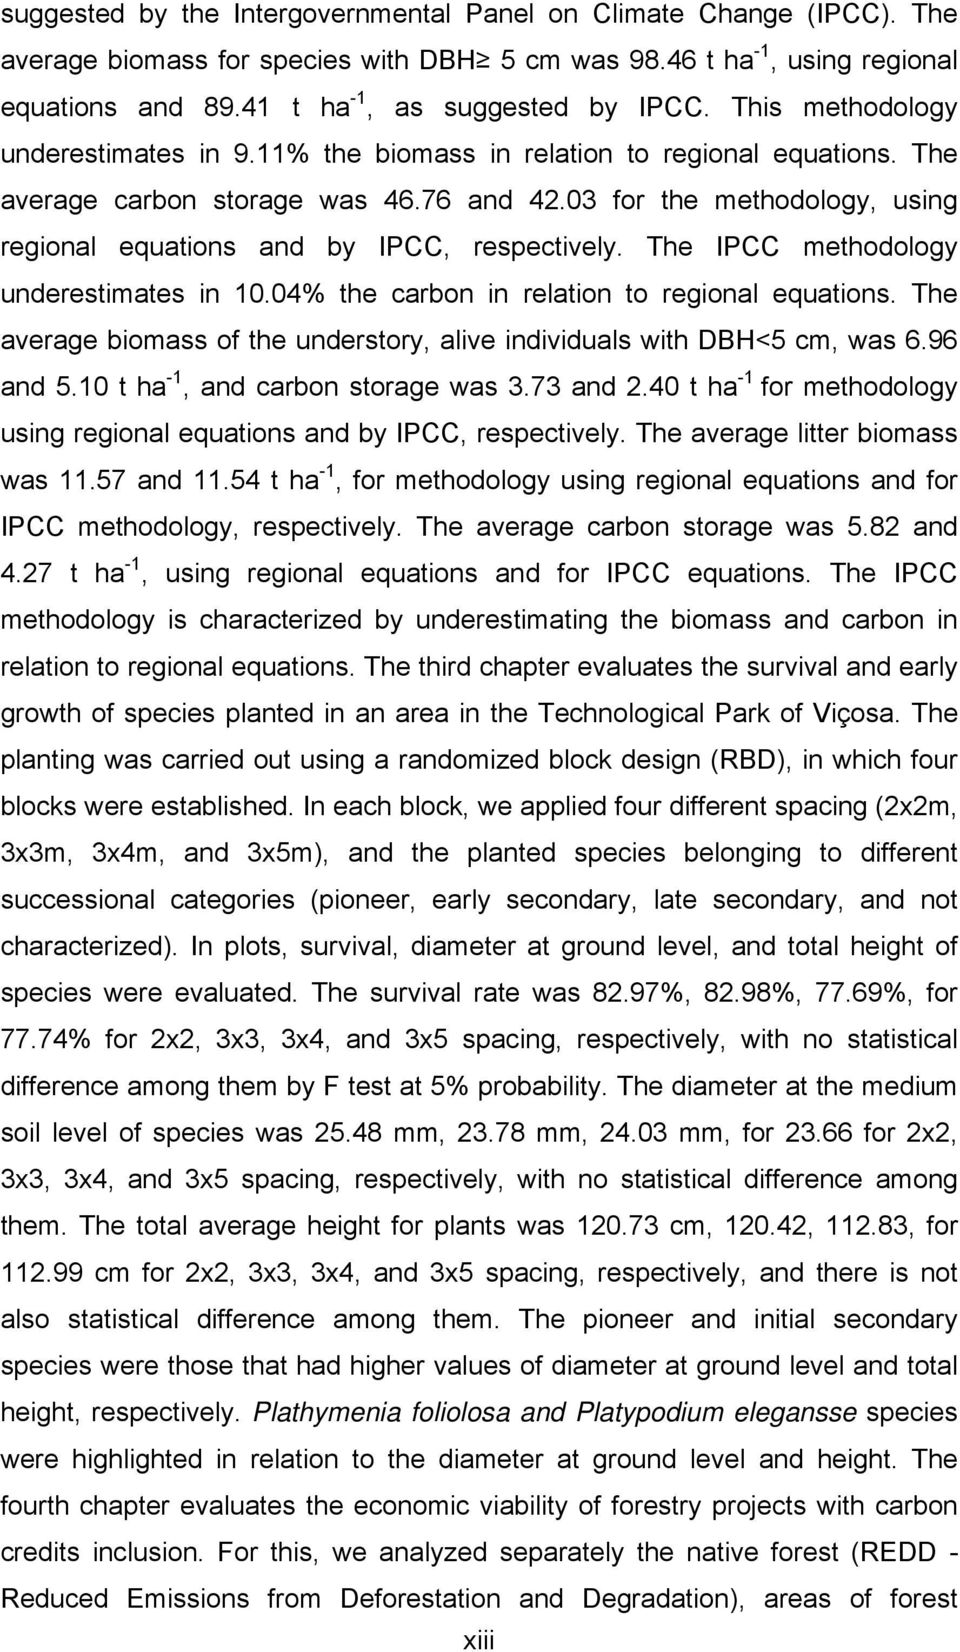 03 for the methodology, using regional equations and by IPCC, respectively. The IPCC methodology underestimates in 10.04% the carbon in relation to regional equations.